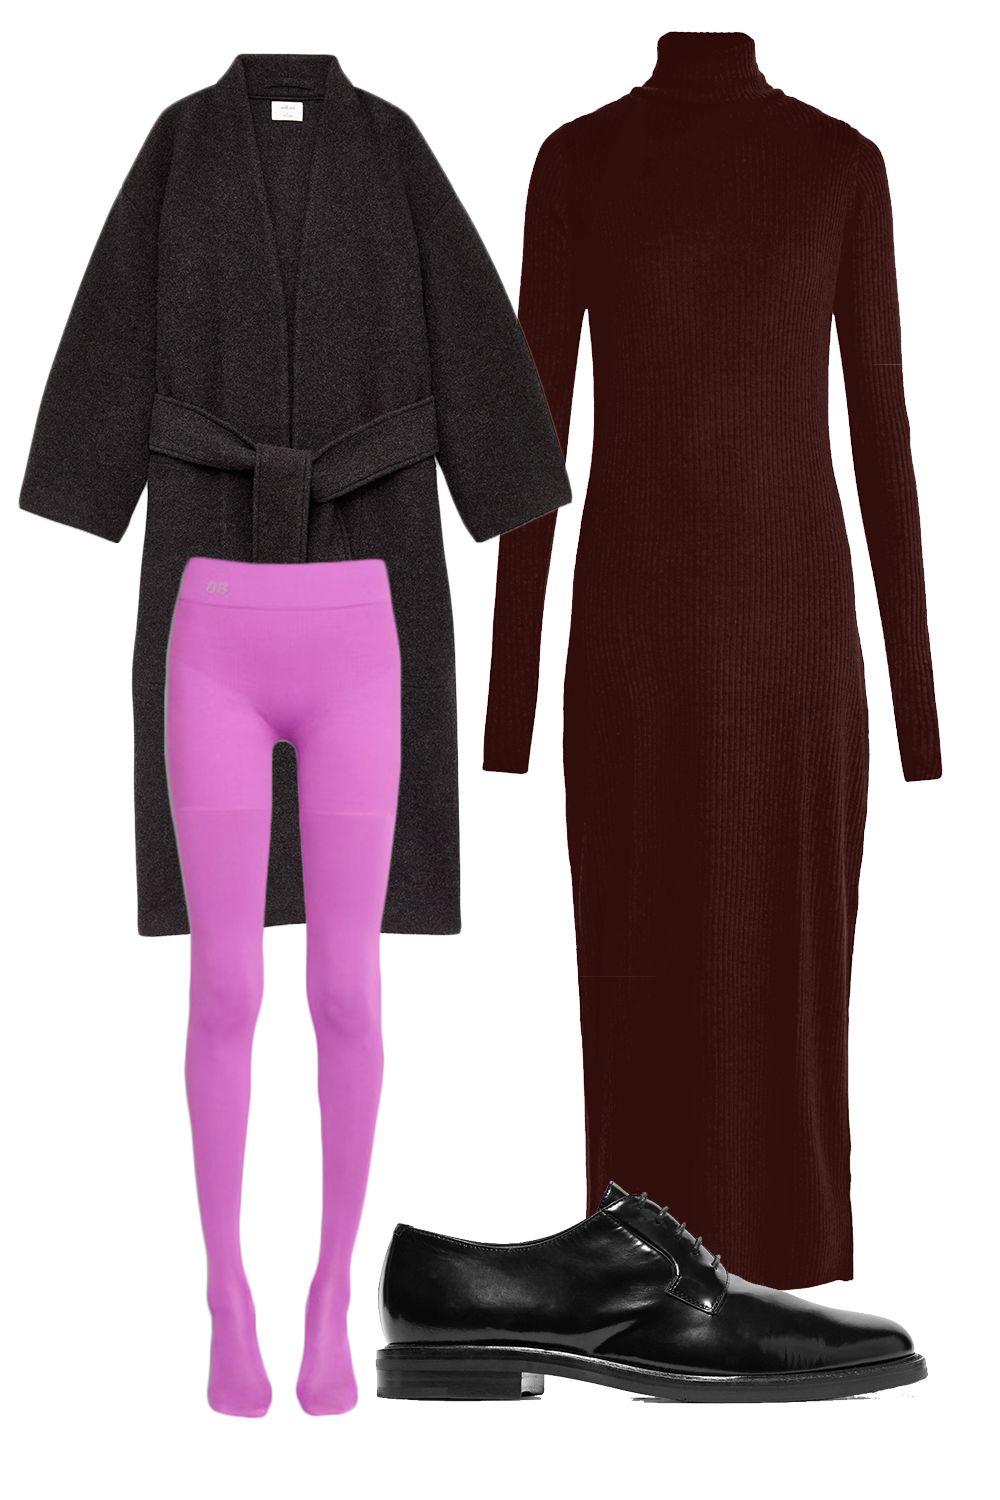 7 fun (and grown-up) ways to wear tights this season From embracing bold  colours to taking them into the evening - Fashionmylegs : The tights and  hosiery blog